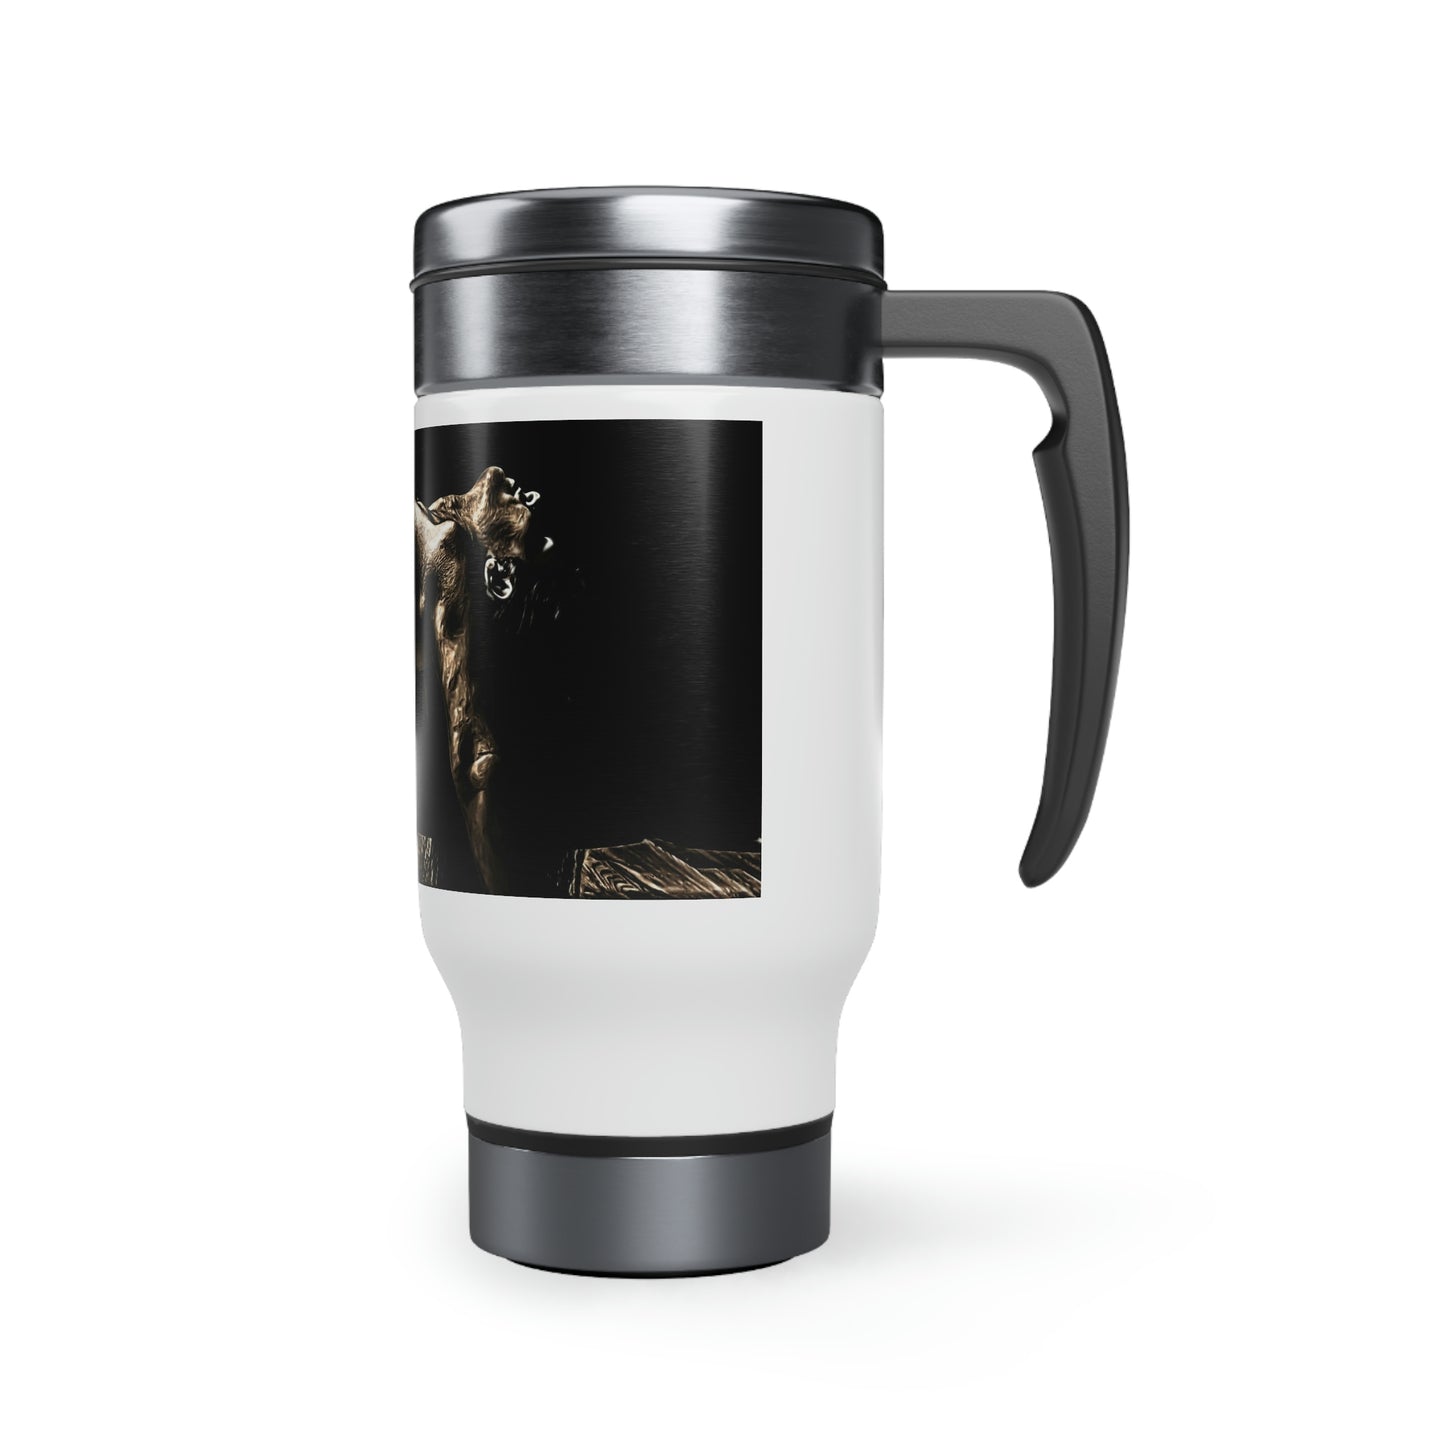 "Bronzed" Stainless Steel Travel Mug with Handle, 14oz